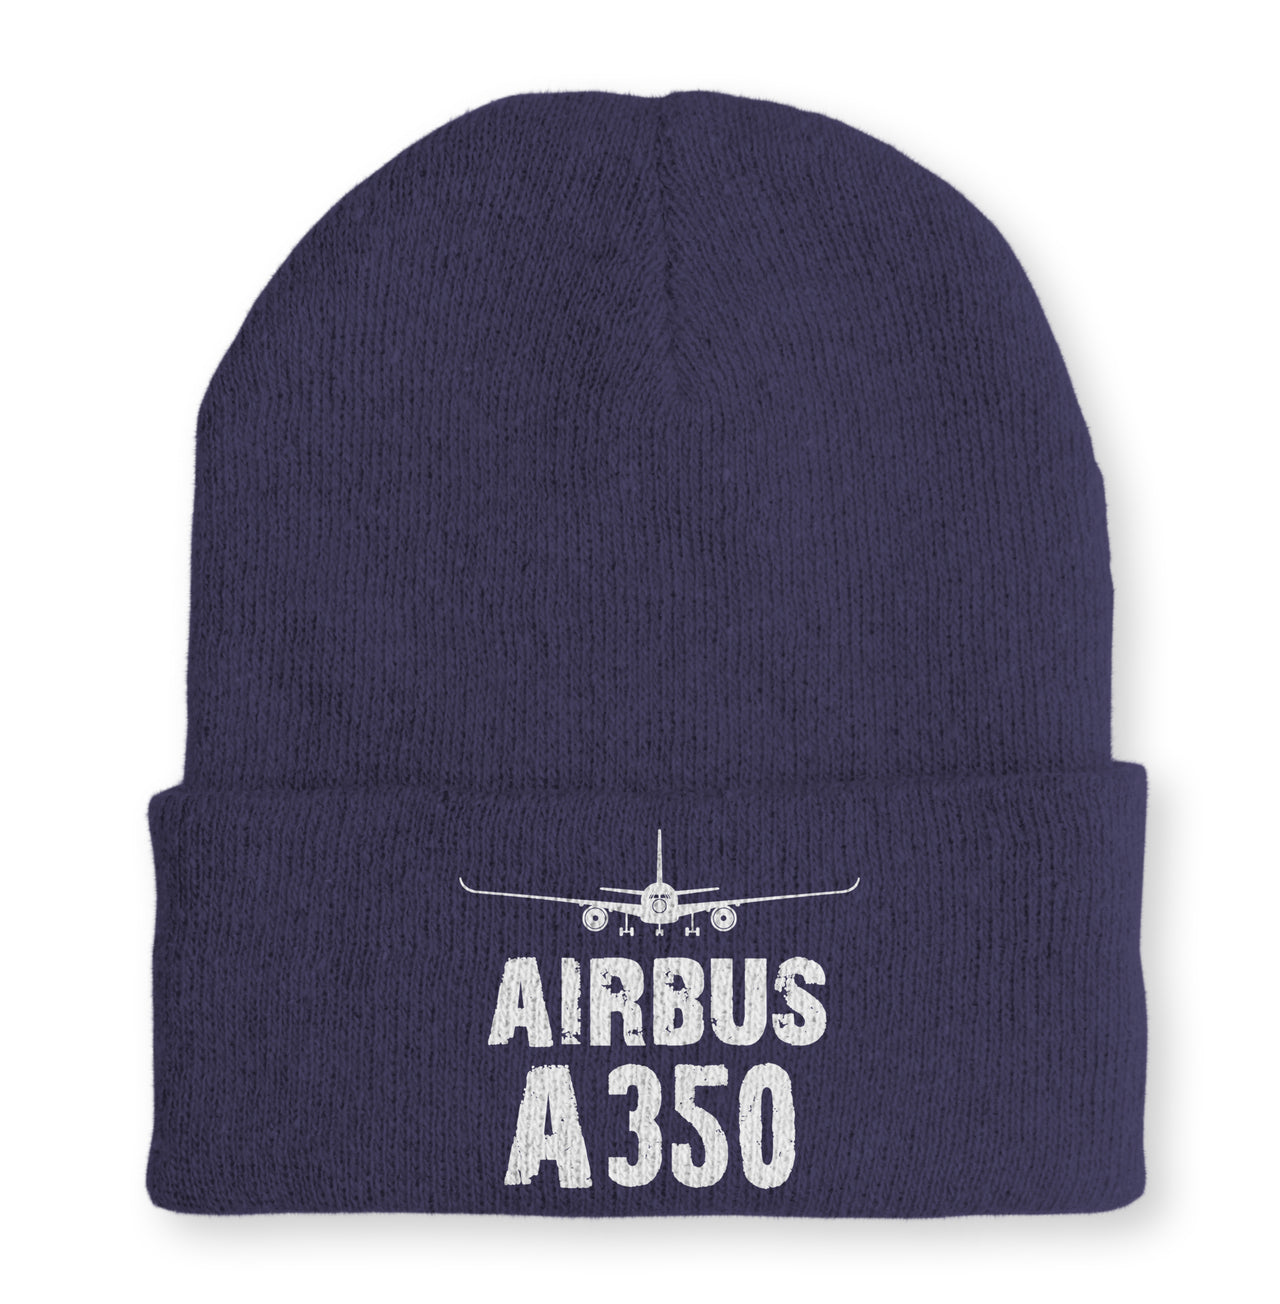 Airbus A350 & Plane Embroidered Beanies